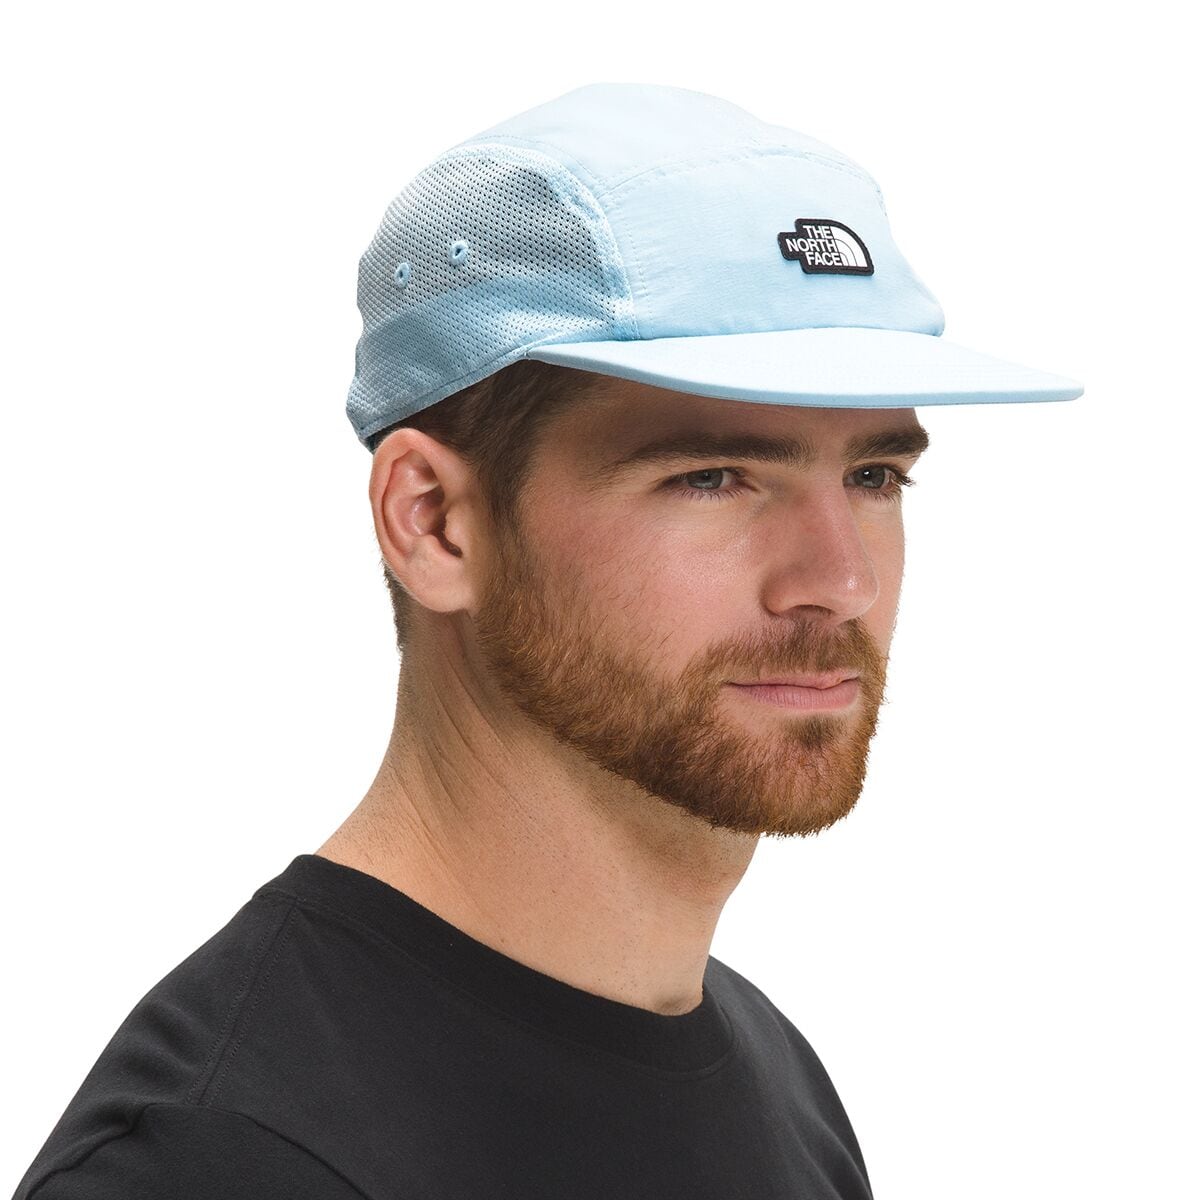 Face camp. The North face 5 Panel cap. The North face class v Camp hat.